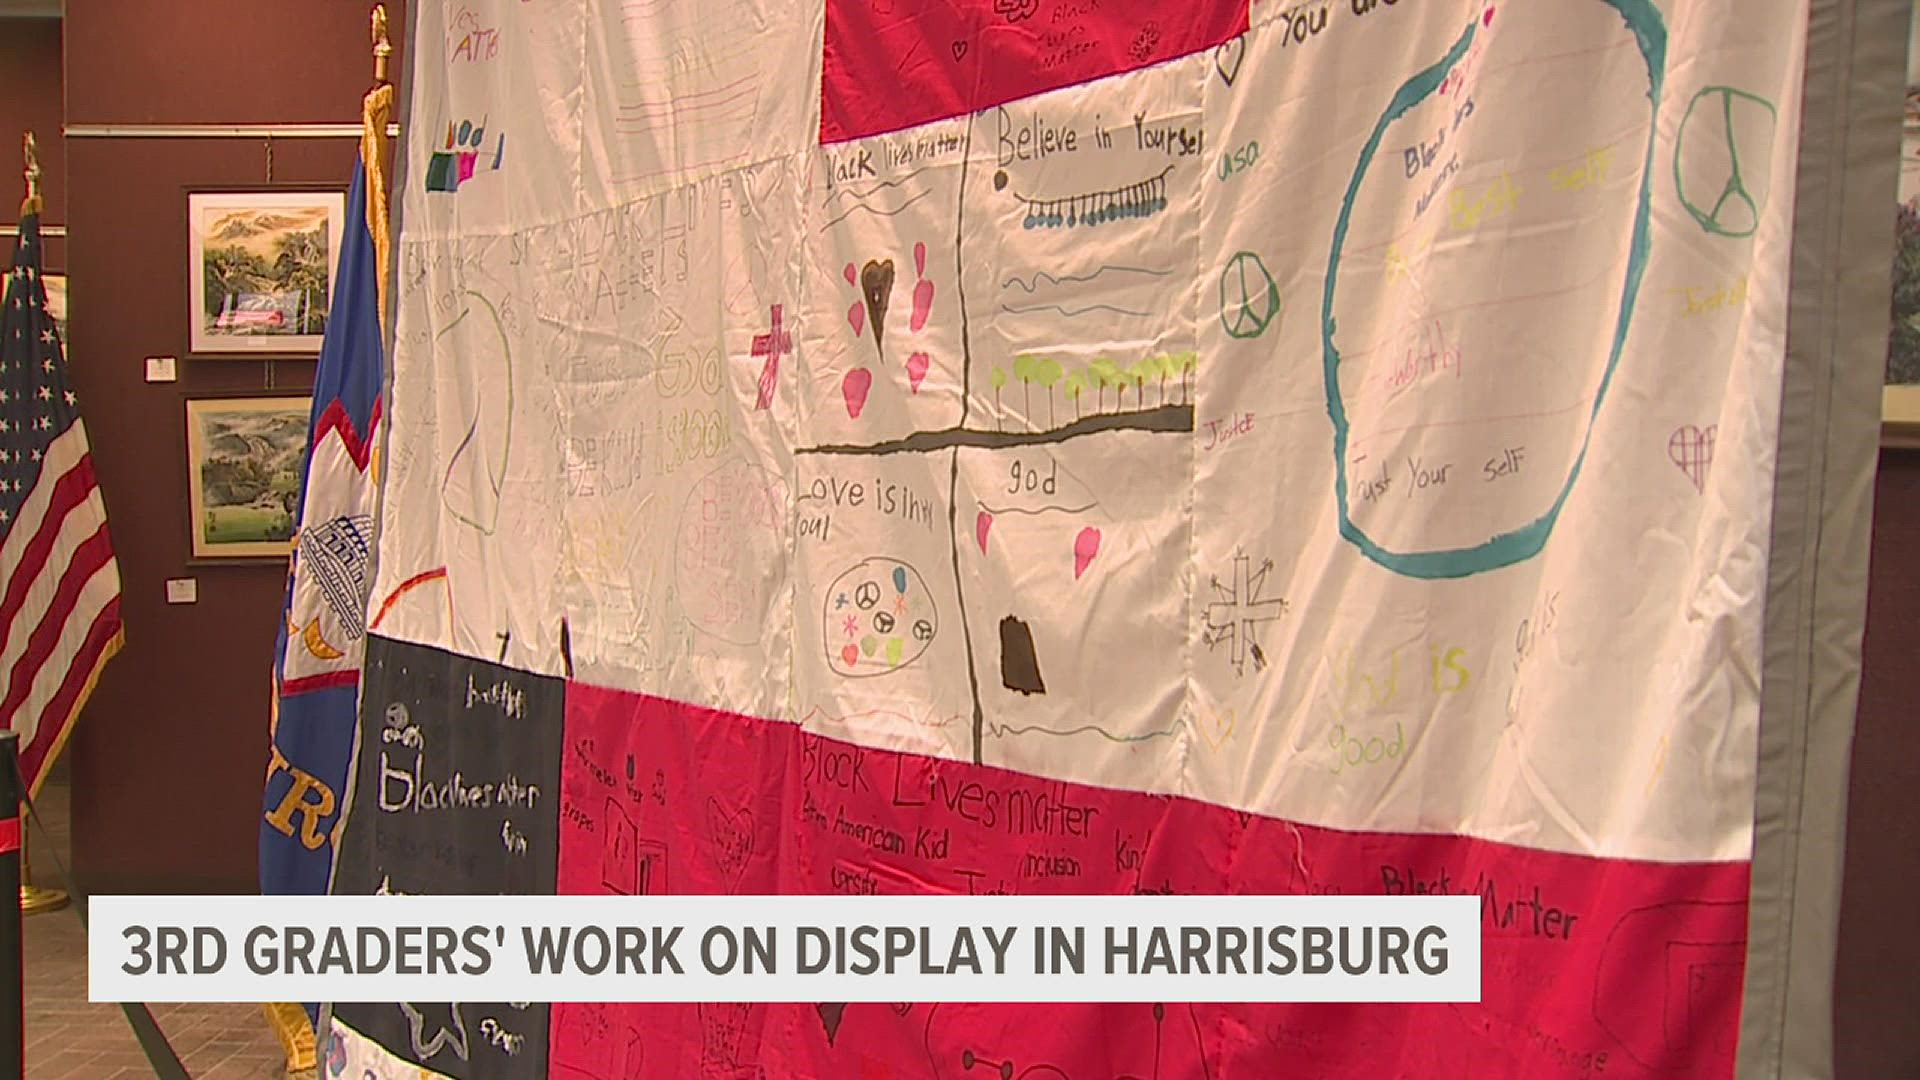 A quilt made by students of Saint Stephen's Episcopal school in Harrisburg is now hanging inside the MLK City Government Center.